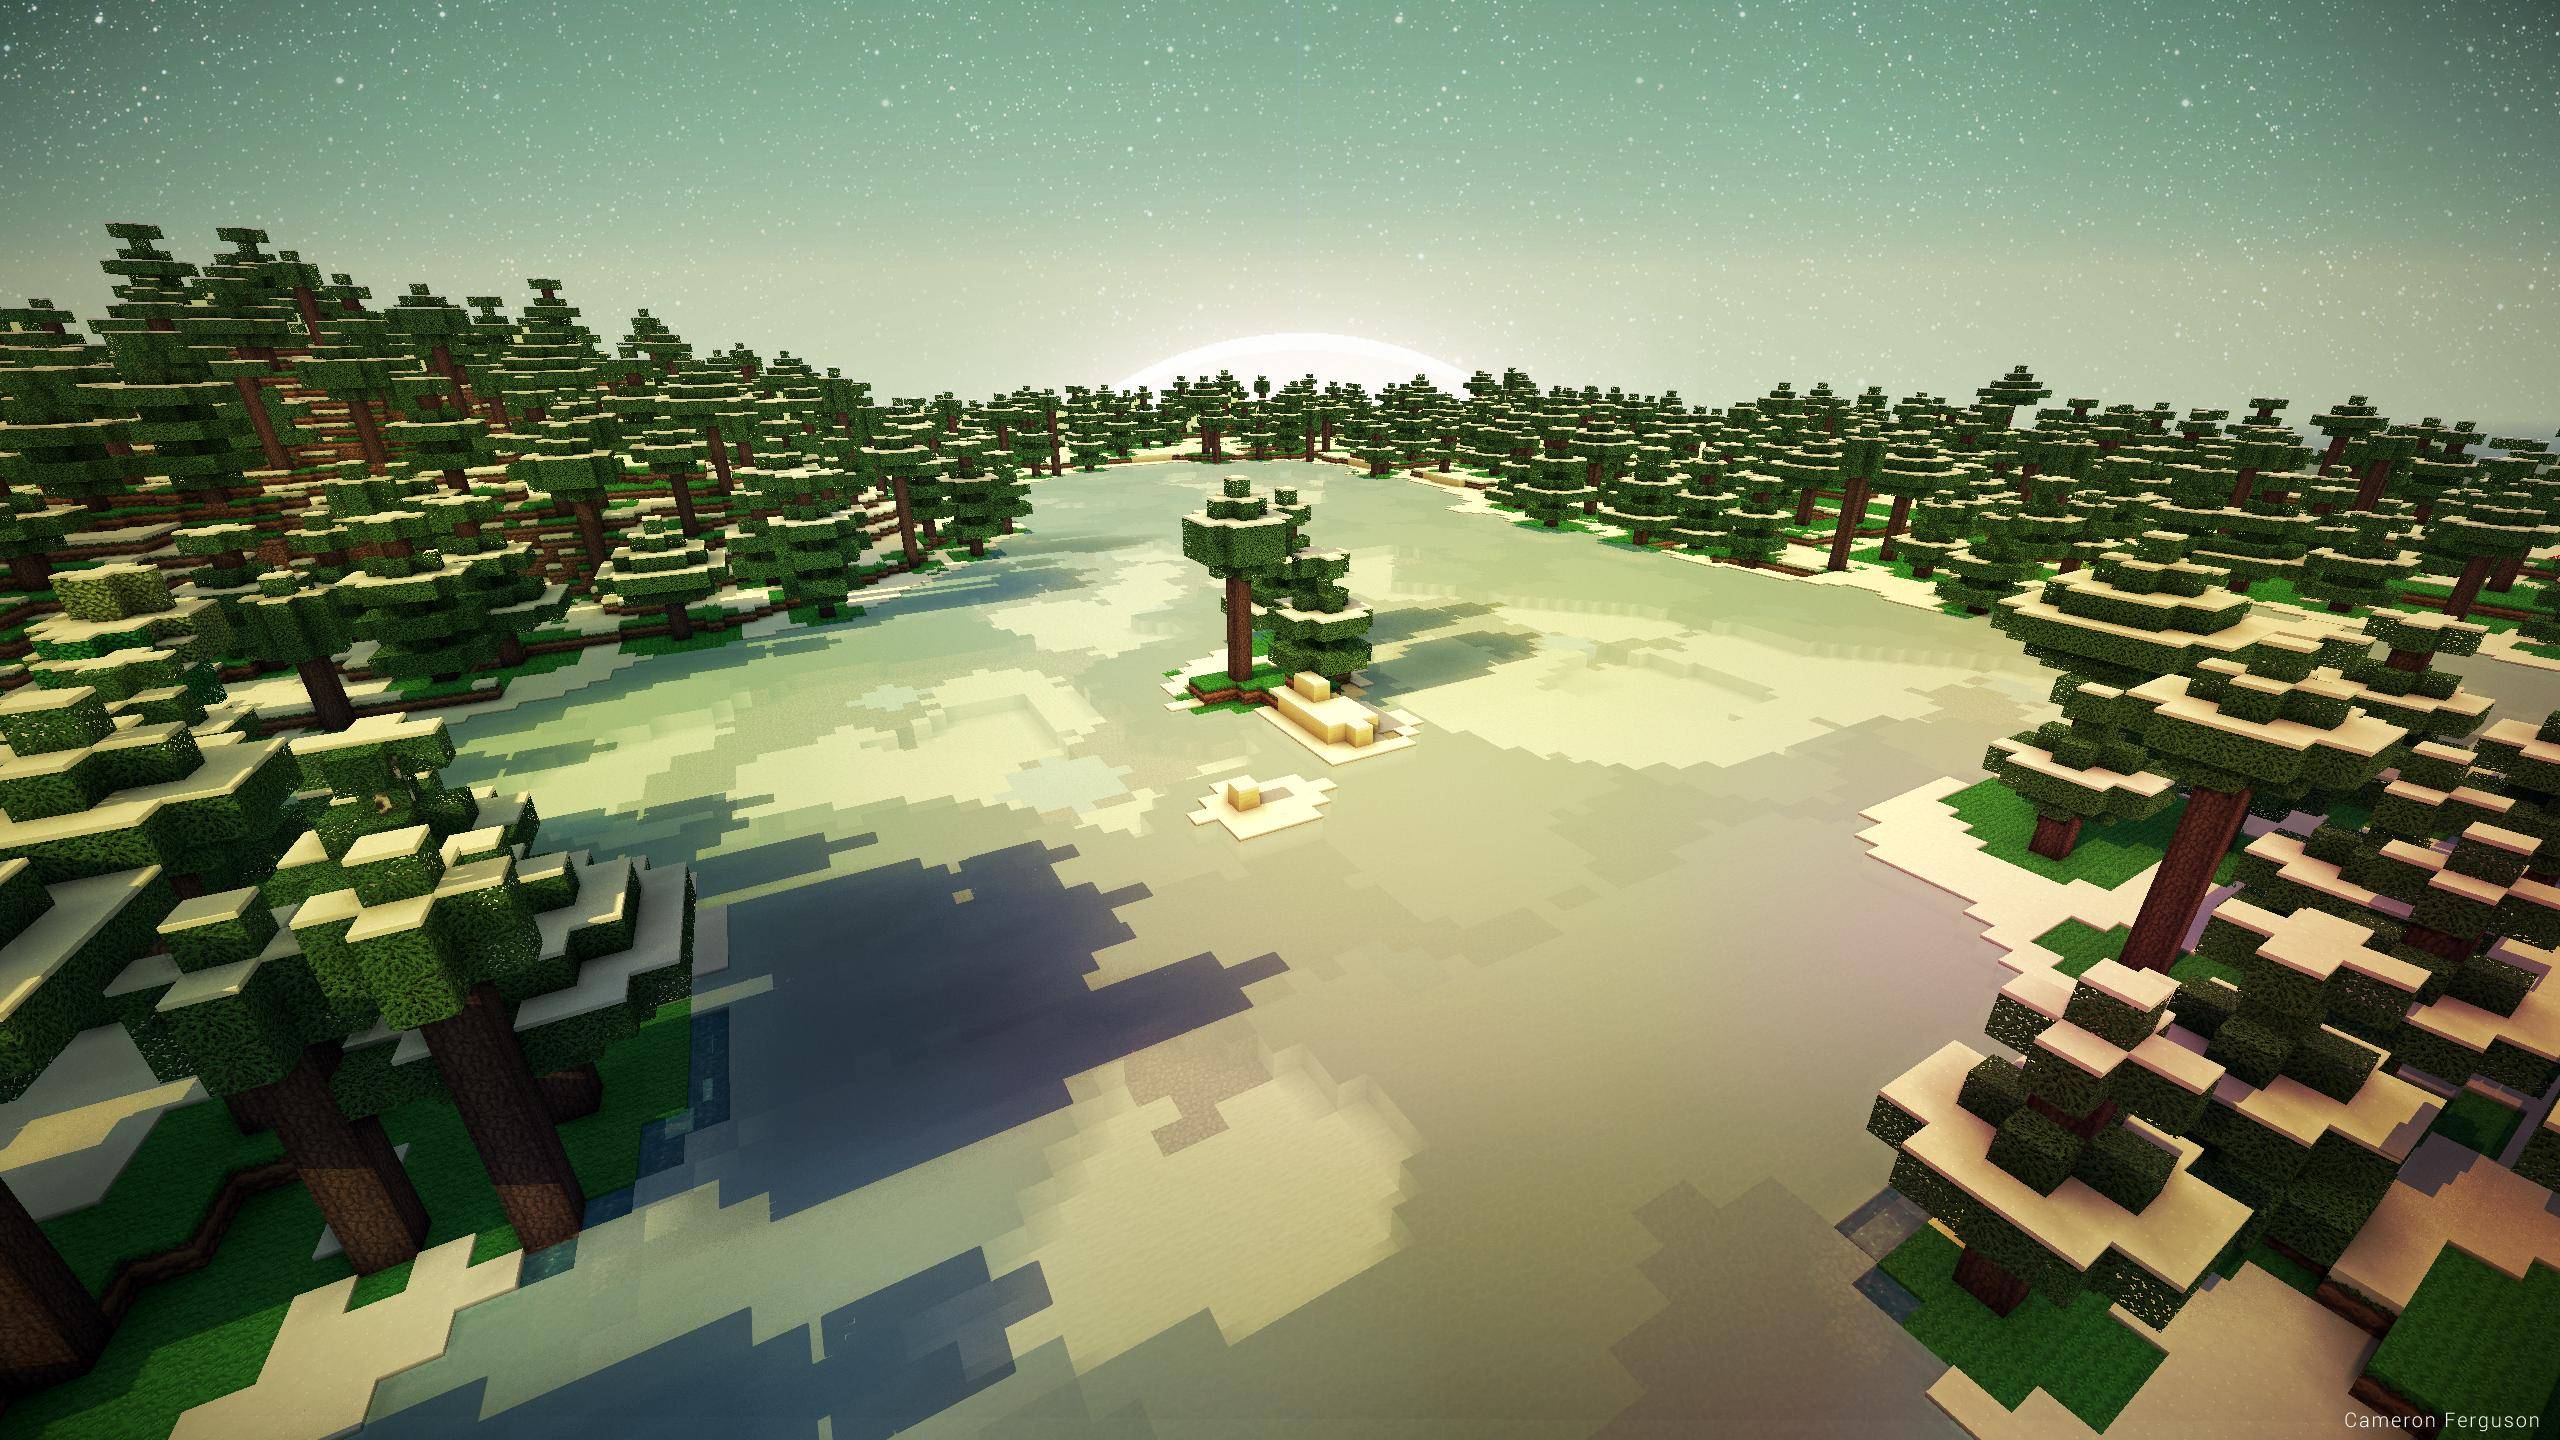 Widescreen Images Collection Of Minecraft - Minecraft Shader - 2560x1440  Wallpaper 